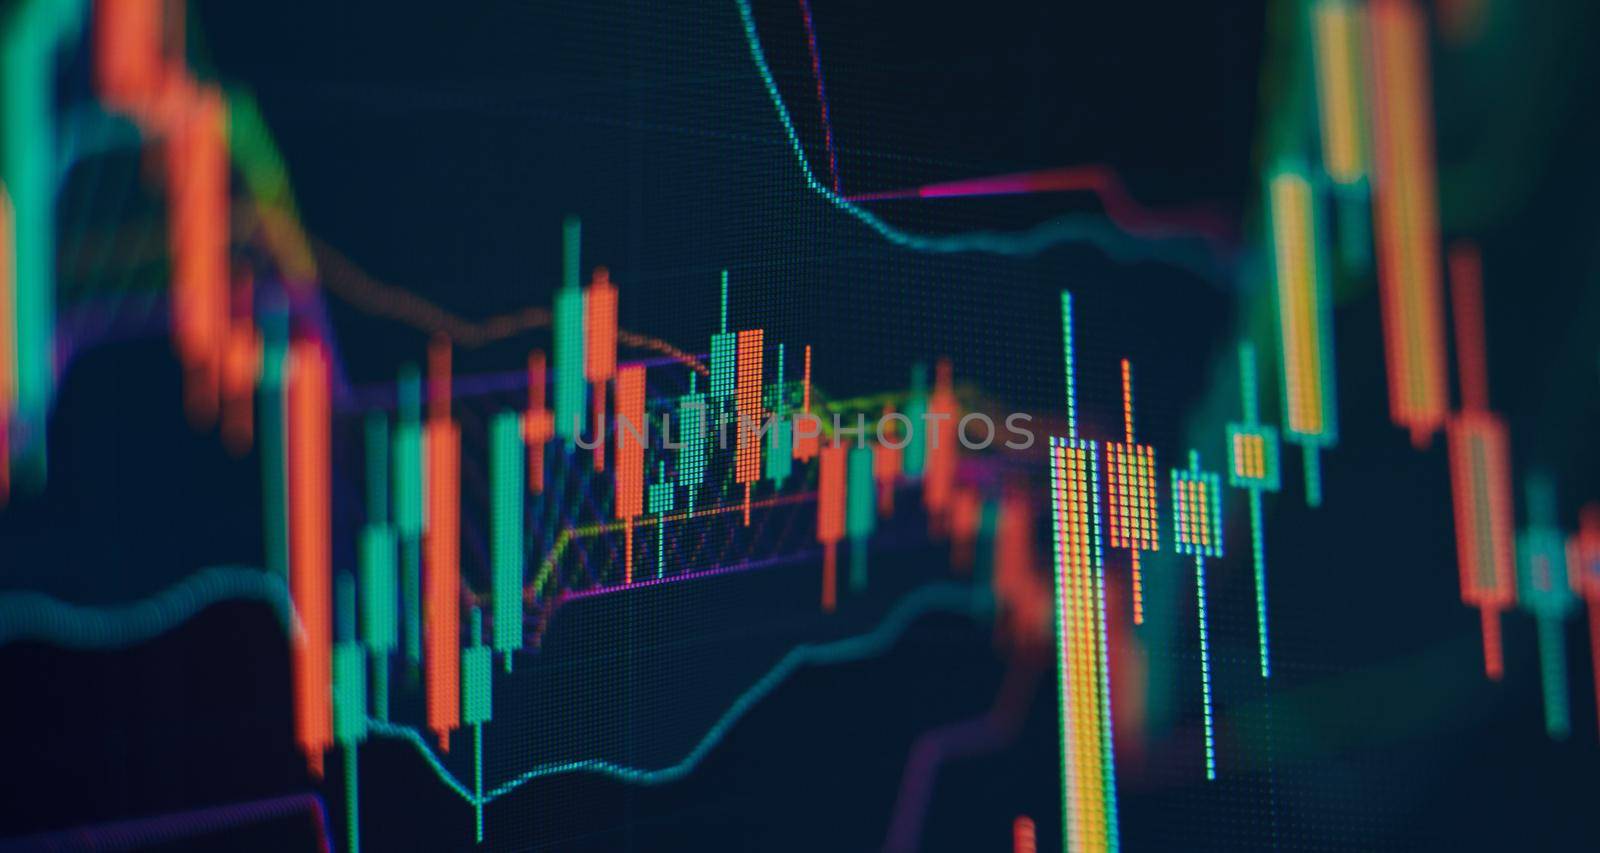 Abstract financial graph with candle stick and bar chart of stock market on financialbackground